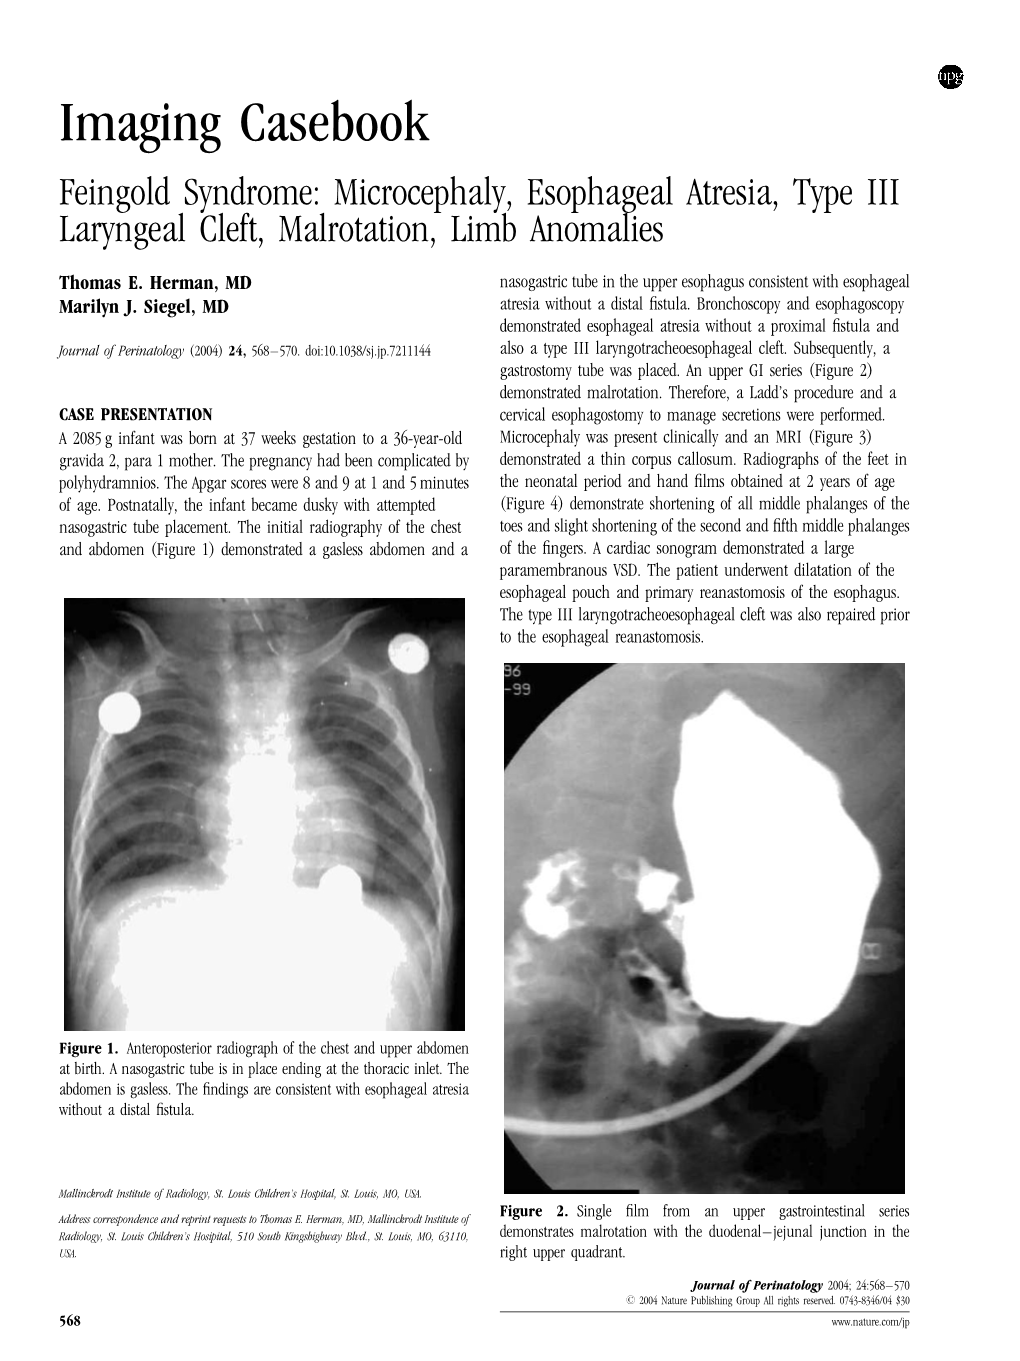 Imaging Casebook Feingold Syndrome: Microcephaly, Esophageal Atresia, Type III Laryngeal Cleft, Malrotation, Limb Anomalies